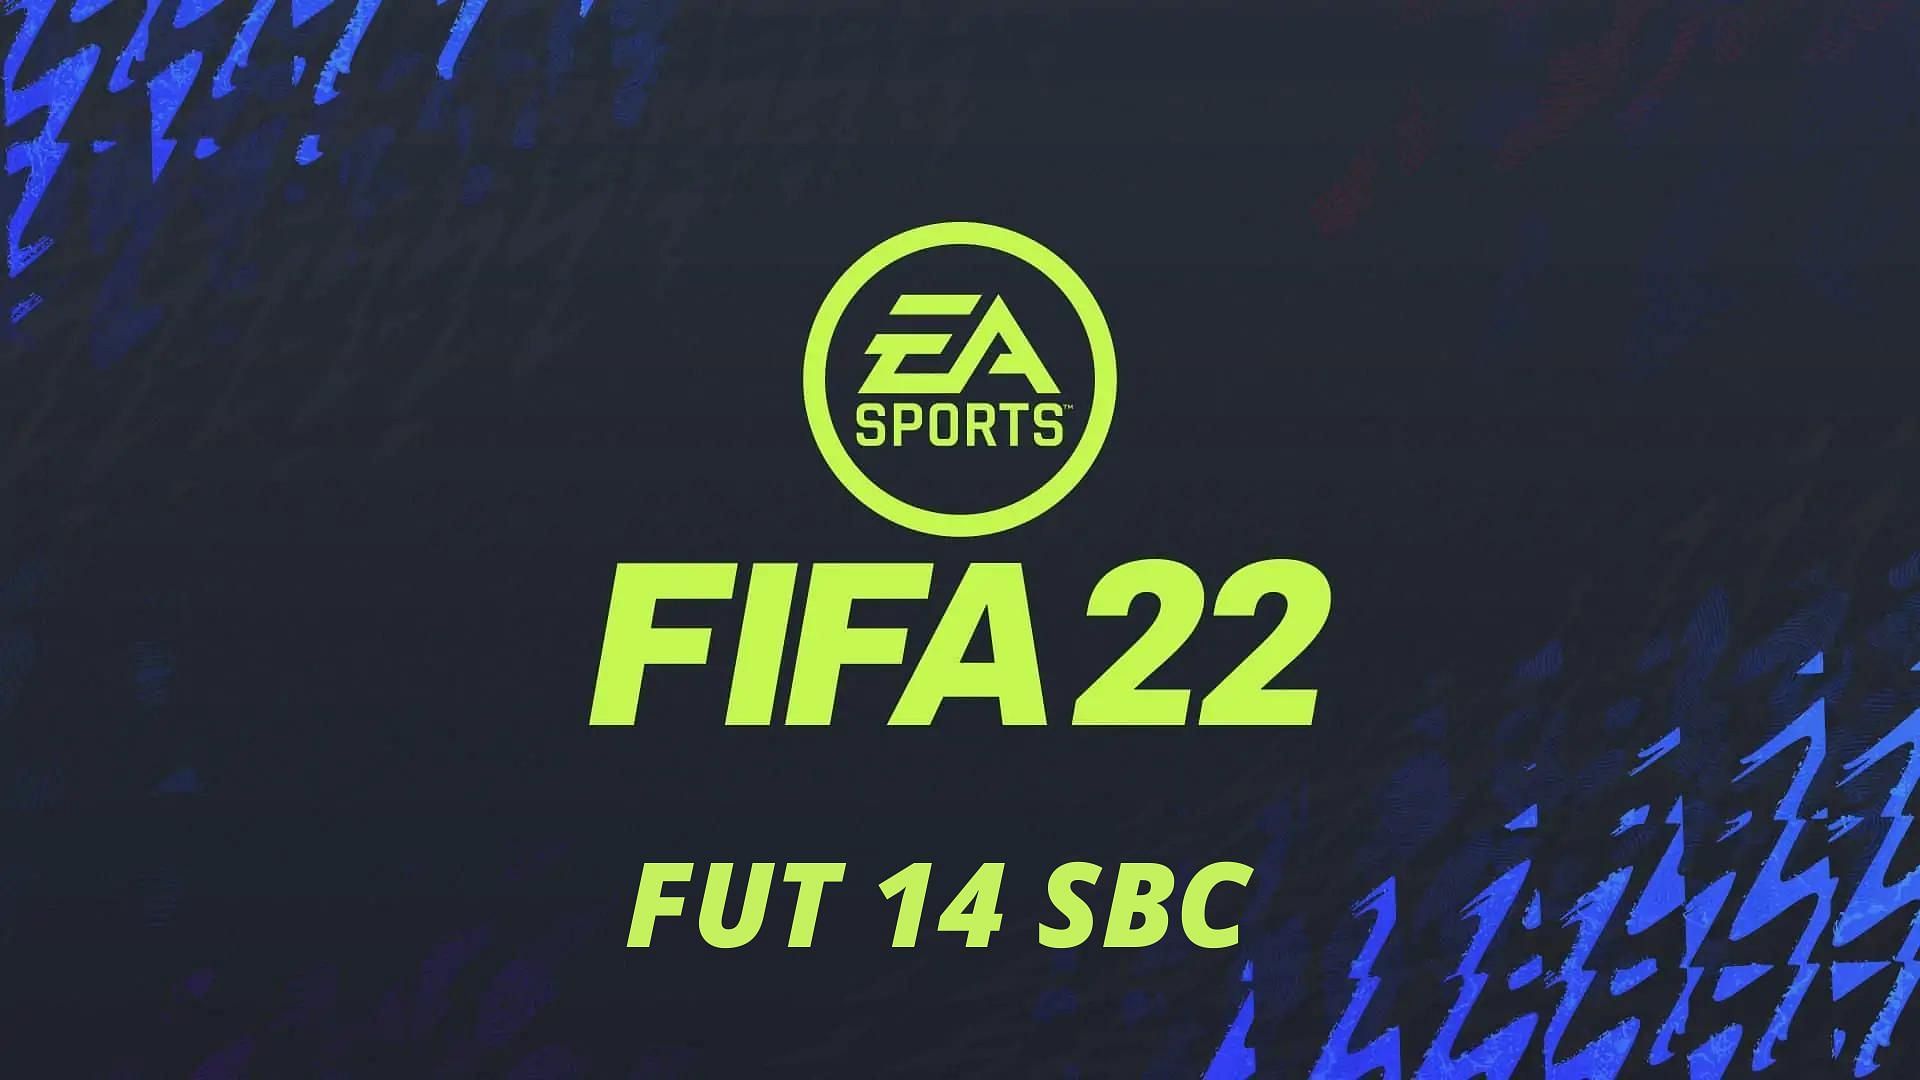 FIFA 22 Ultimate Team: How to complete the FUT 14 SBC in FUT 22